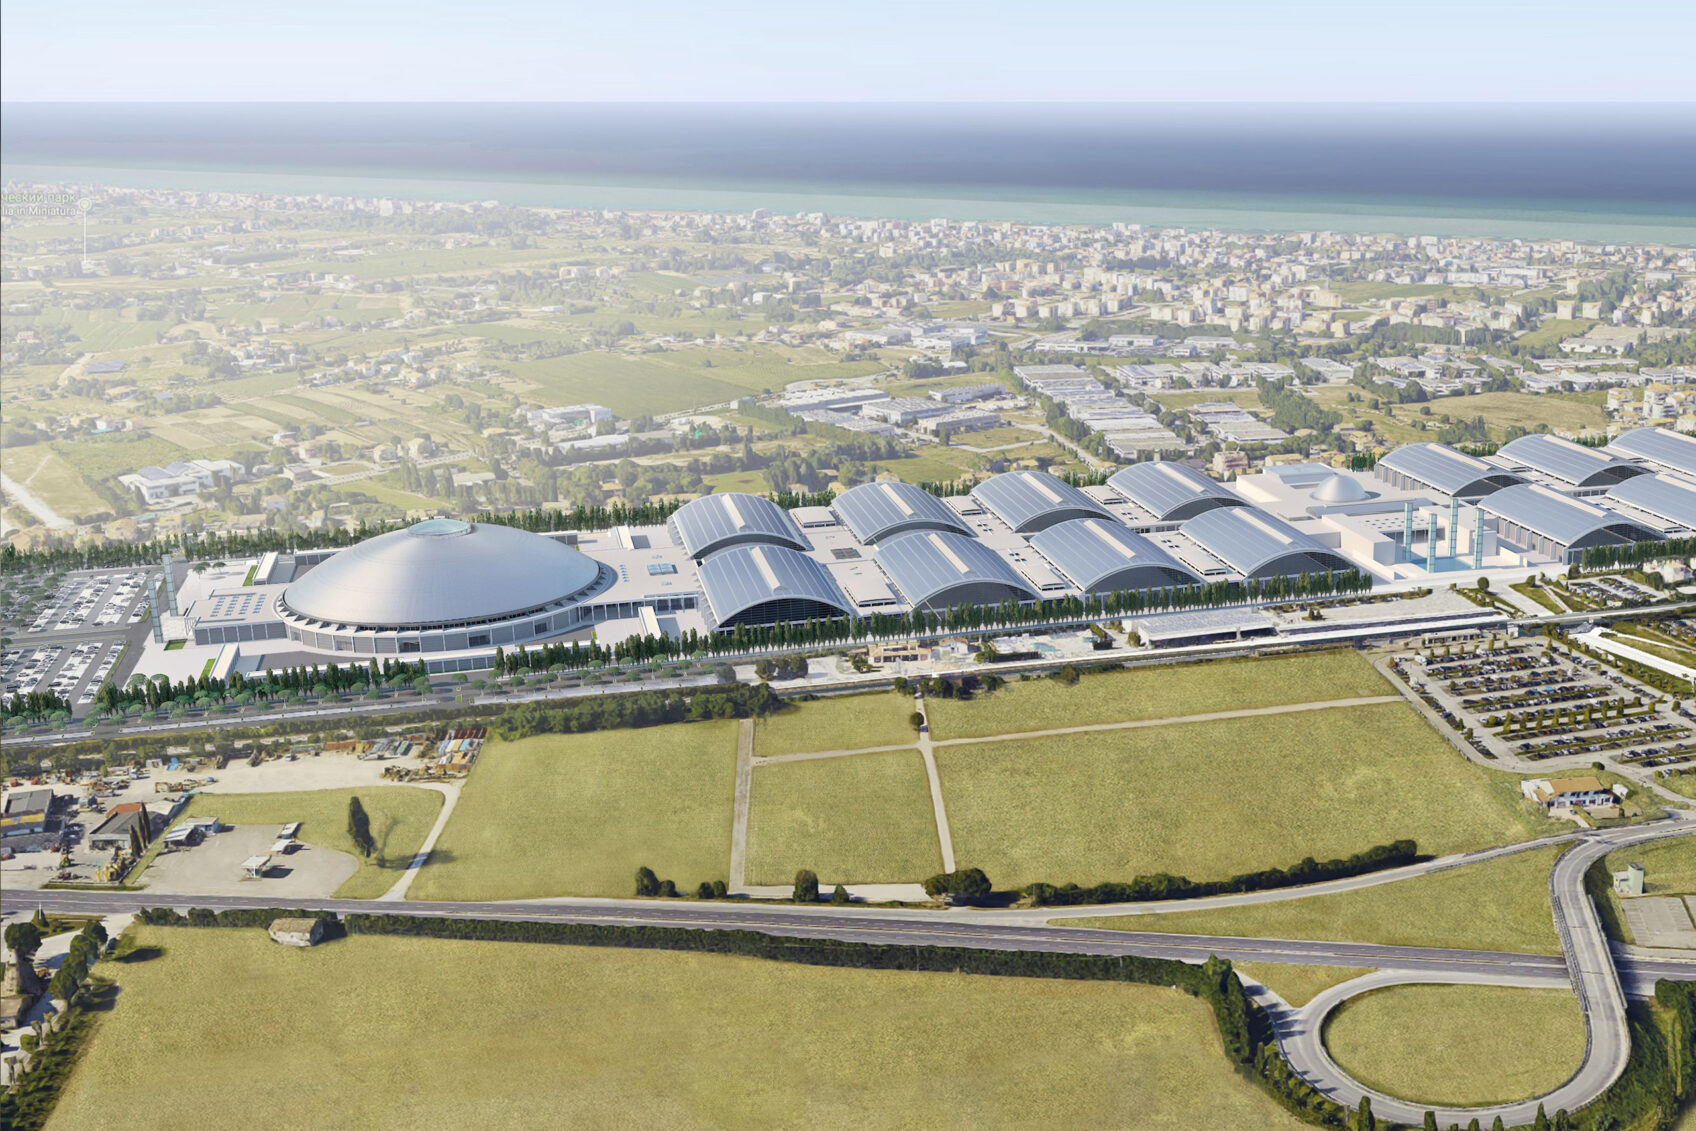 Render with a bird's eye view of the new circular pavilion at the Rimini Fairgrounds